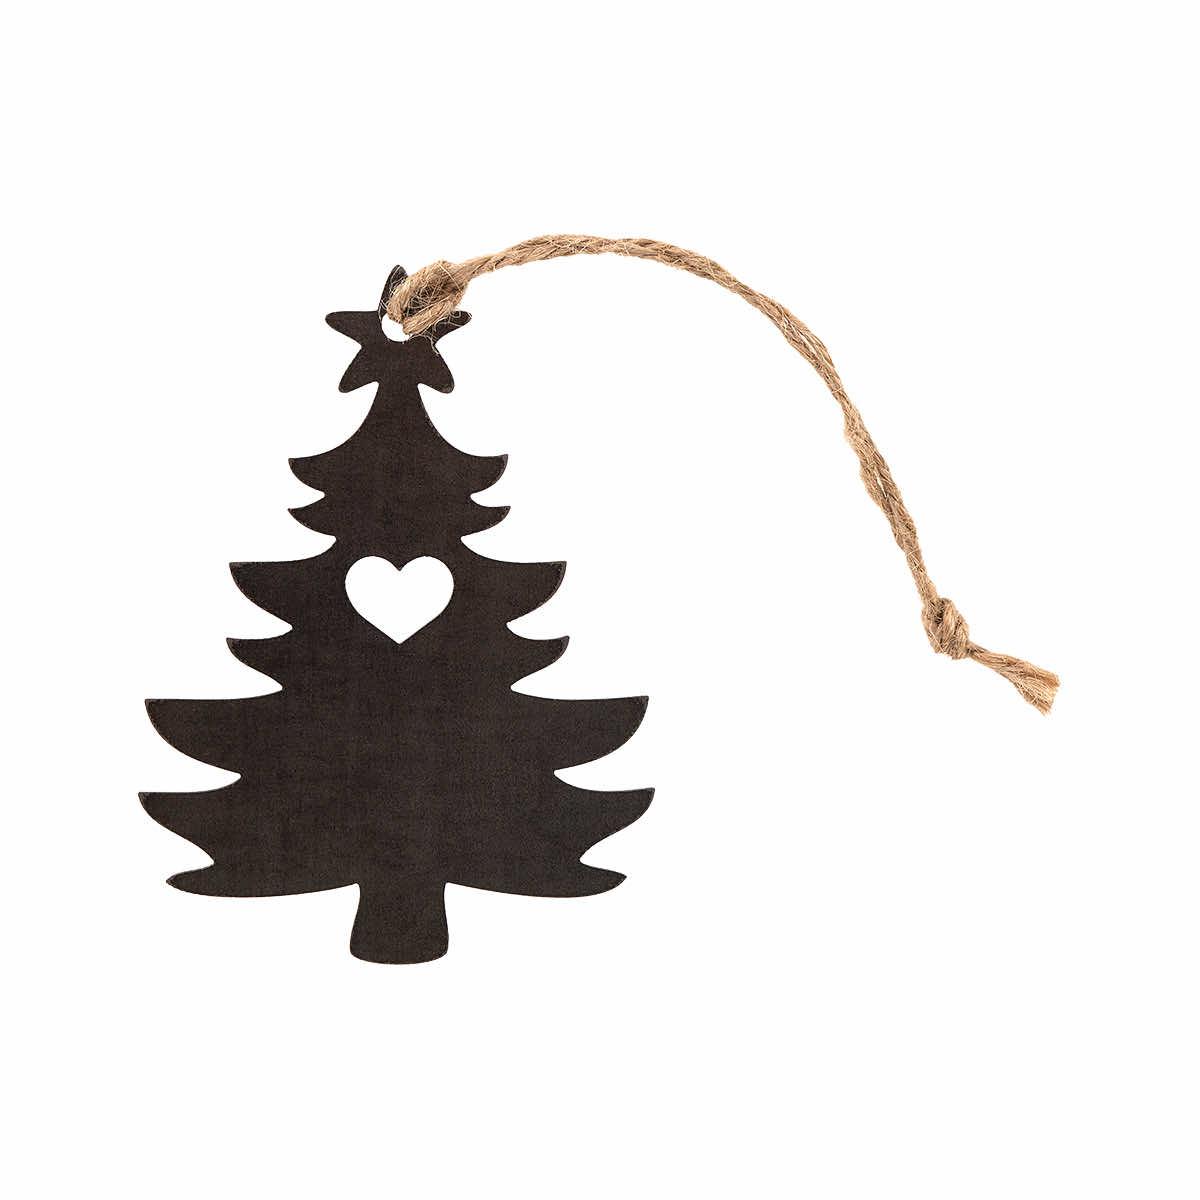  Christmas Tree With Heart Ornament